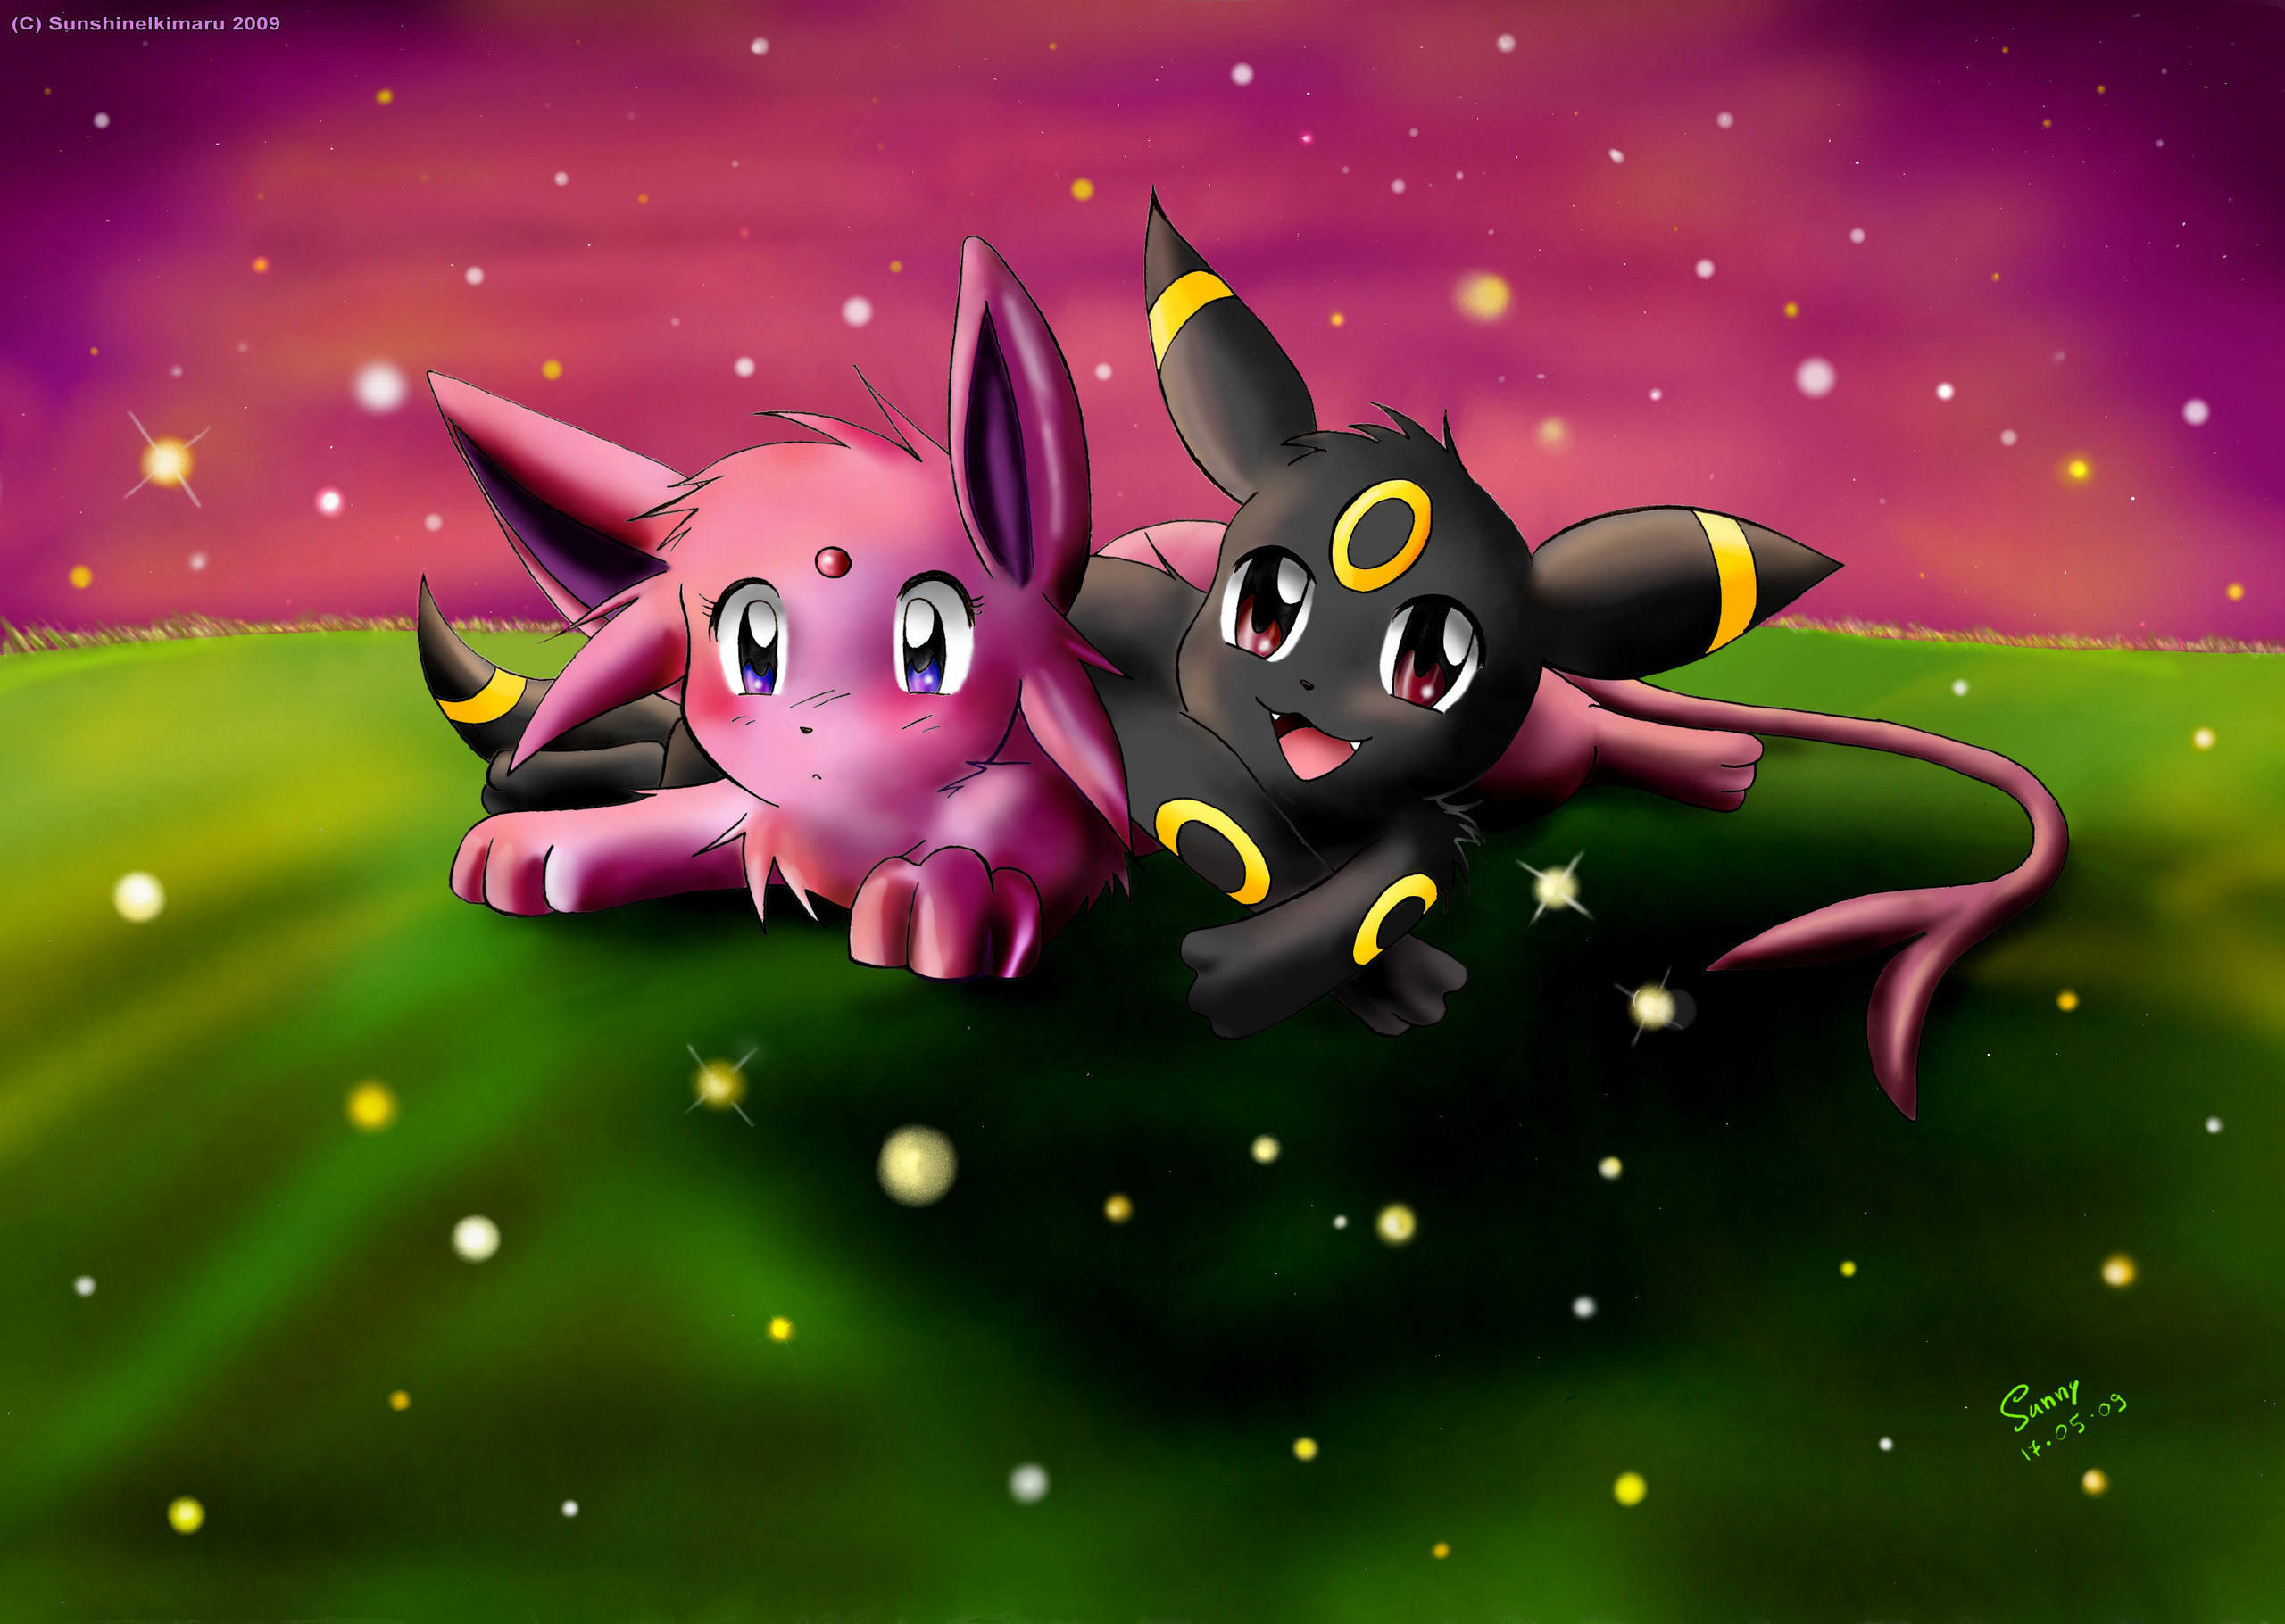 2560x1820 Umbreon and Espeon images Umbreon and Espeon HD wallpaper and background  photos